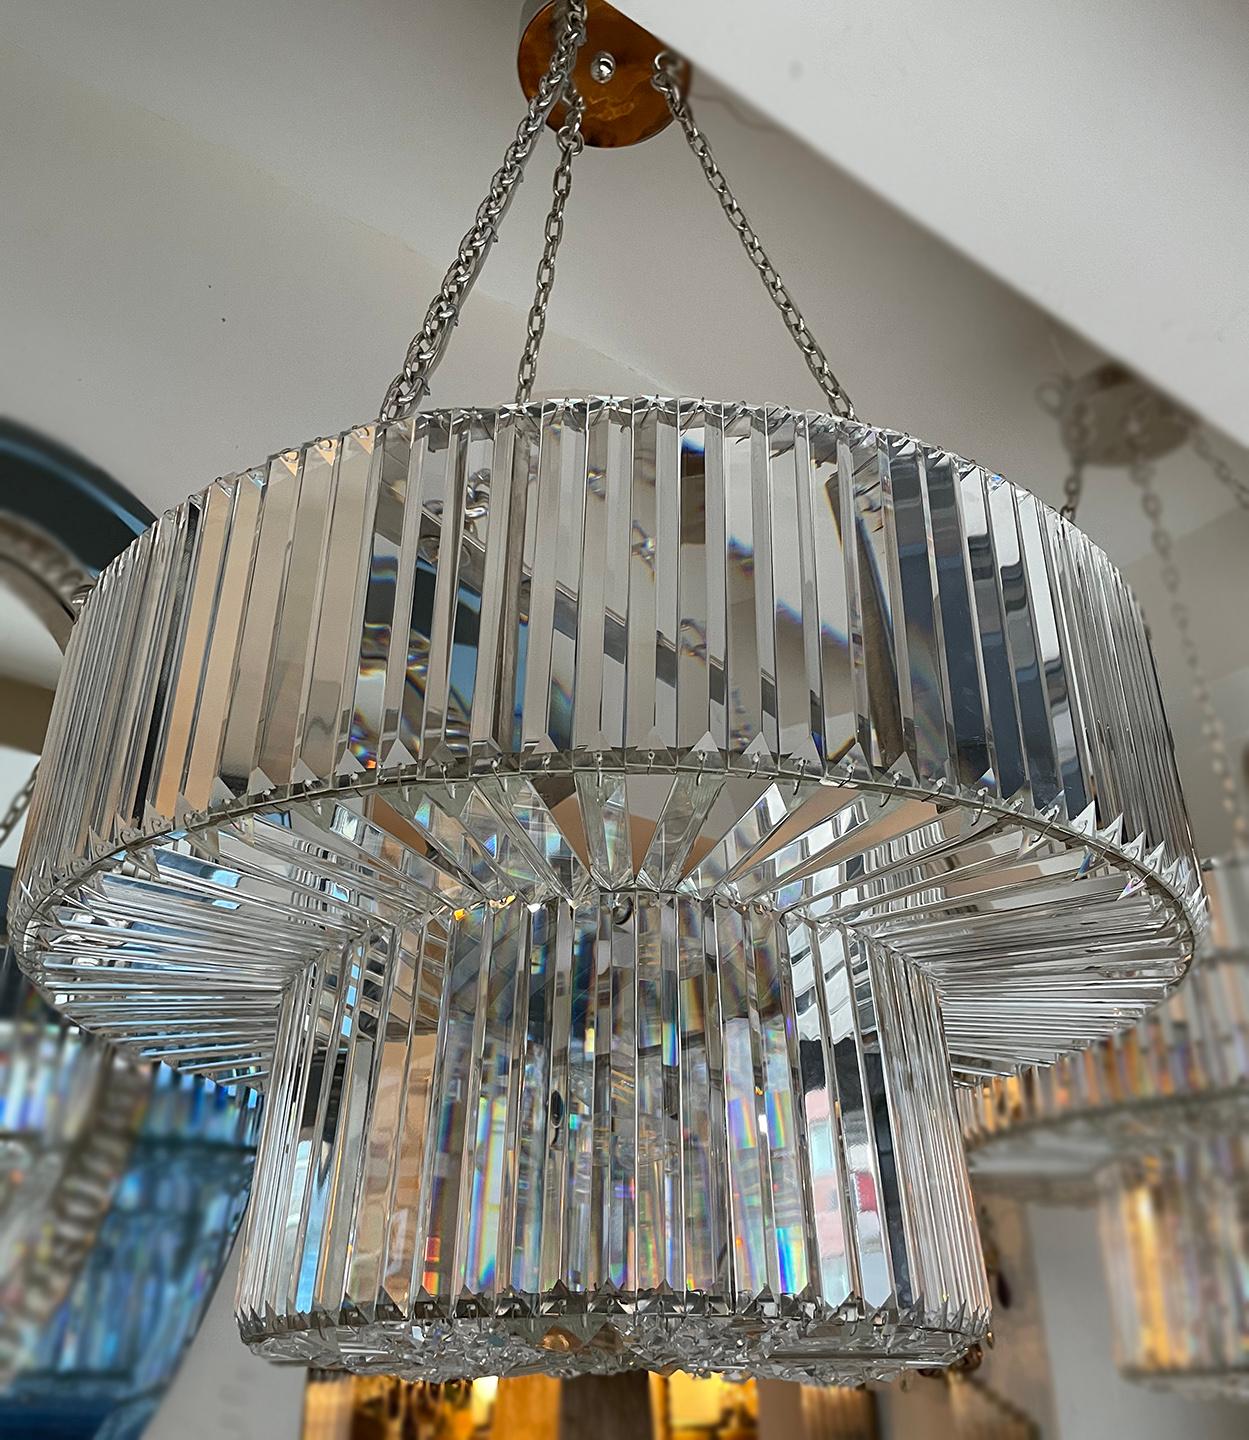 A pair of circa 1950's French moderne crystal light fixture with 8 interior lights. Sold individually.

Measurements:
Diameter: 29